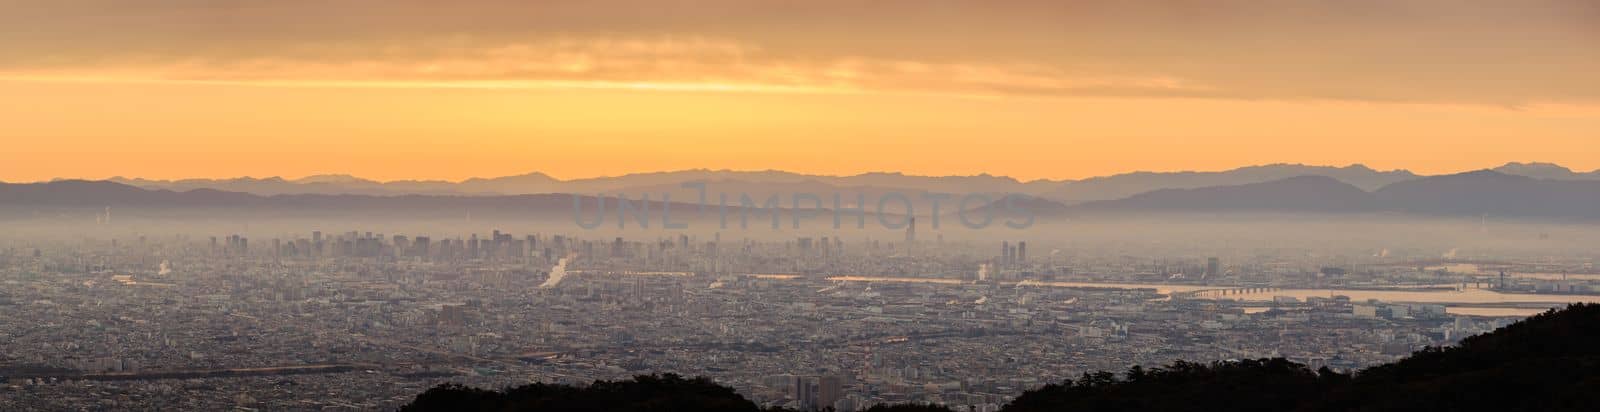 Panoramic view of haze layer over city with orange glow in sky at sunrise by Osaze